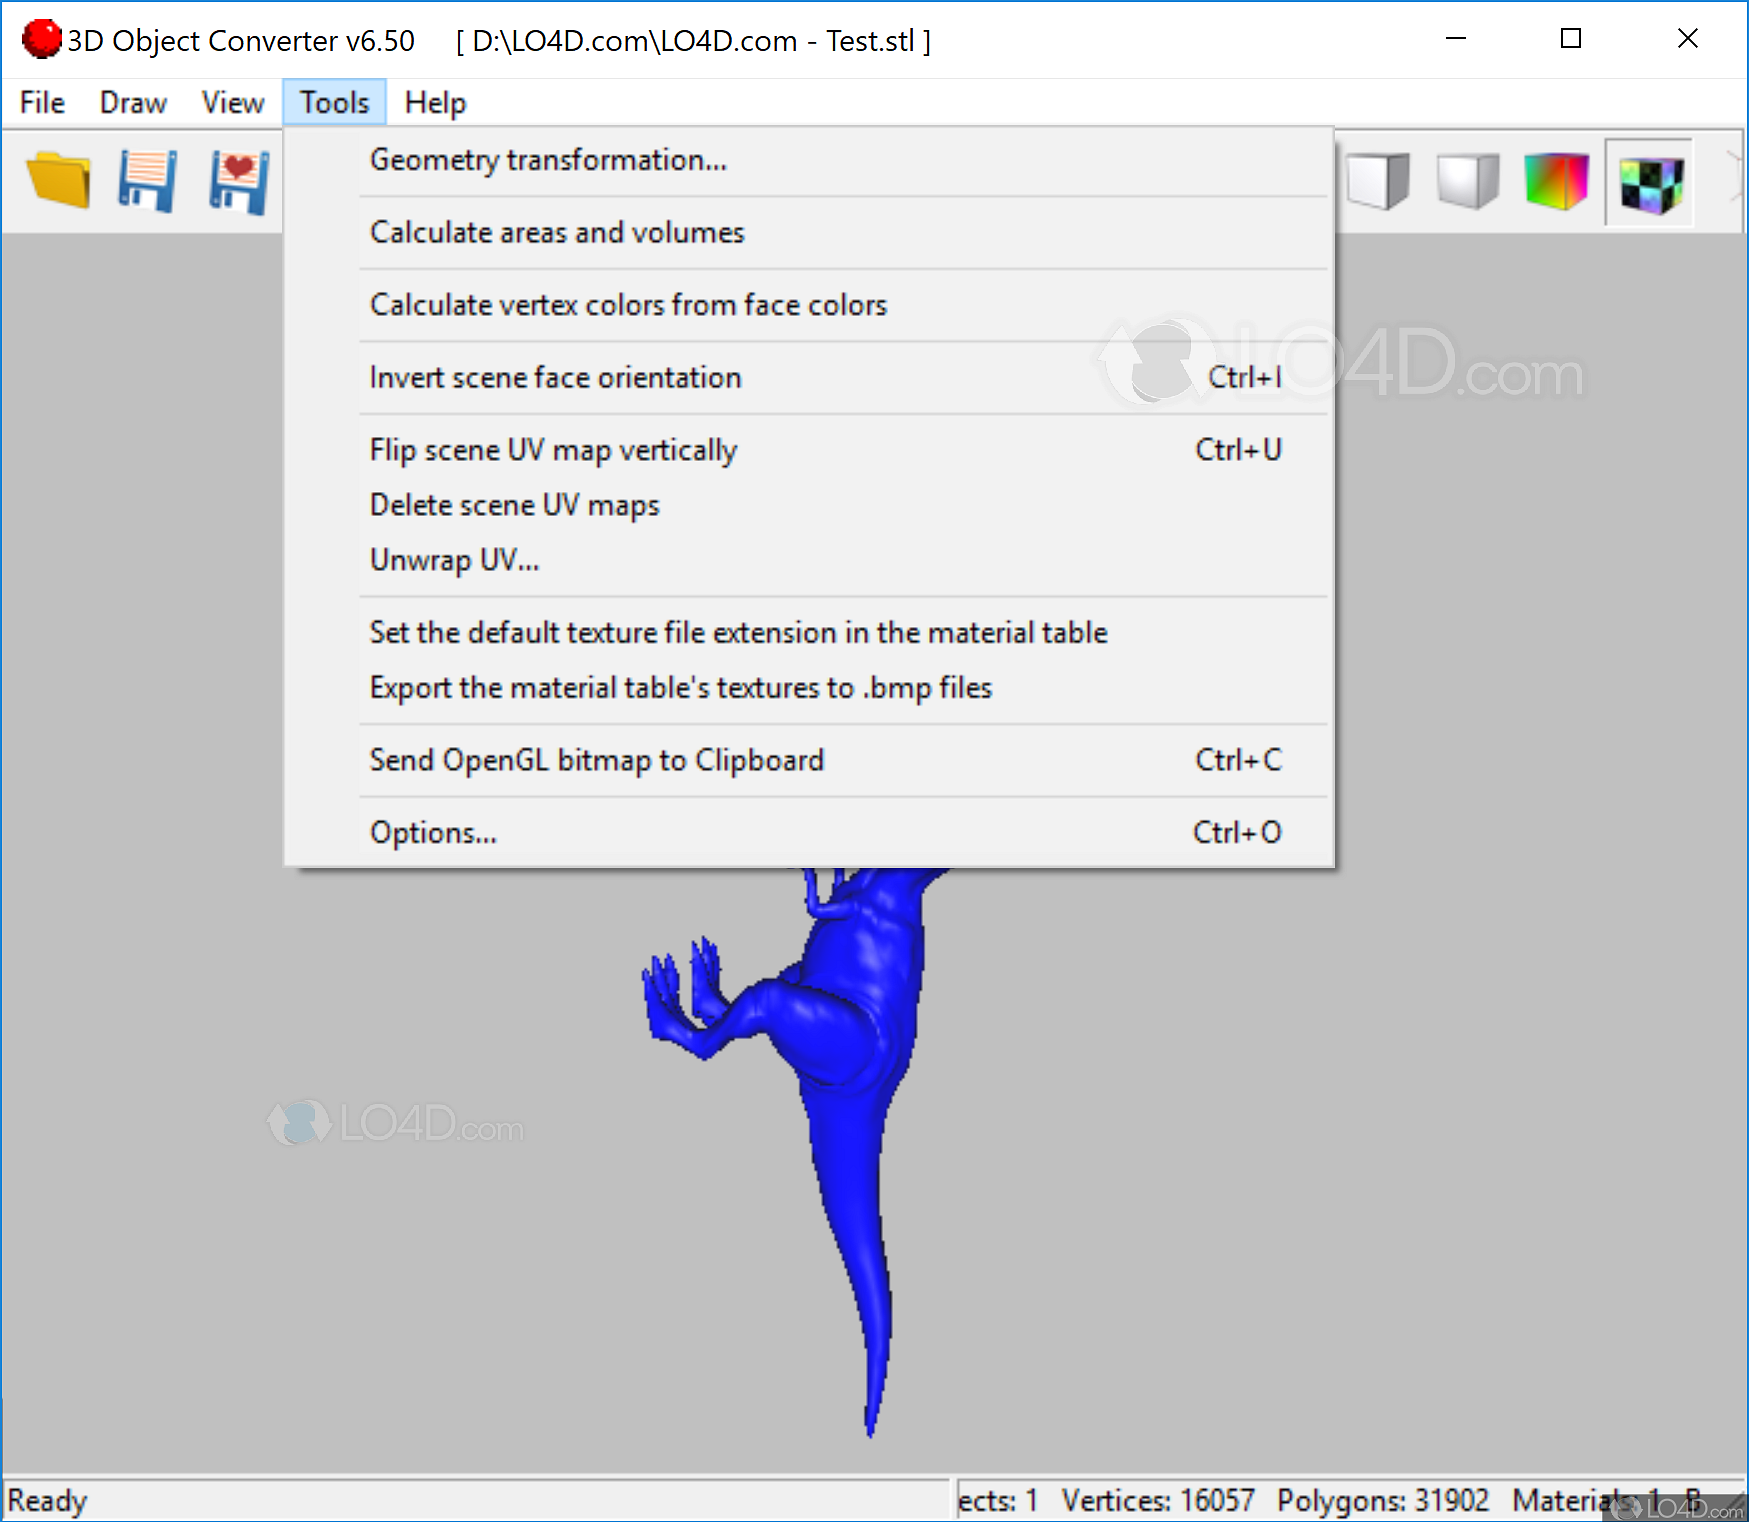 3d object converter 4.0, or ultimate unwrap